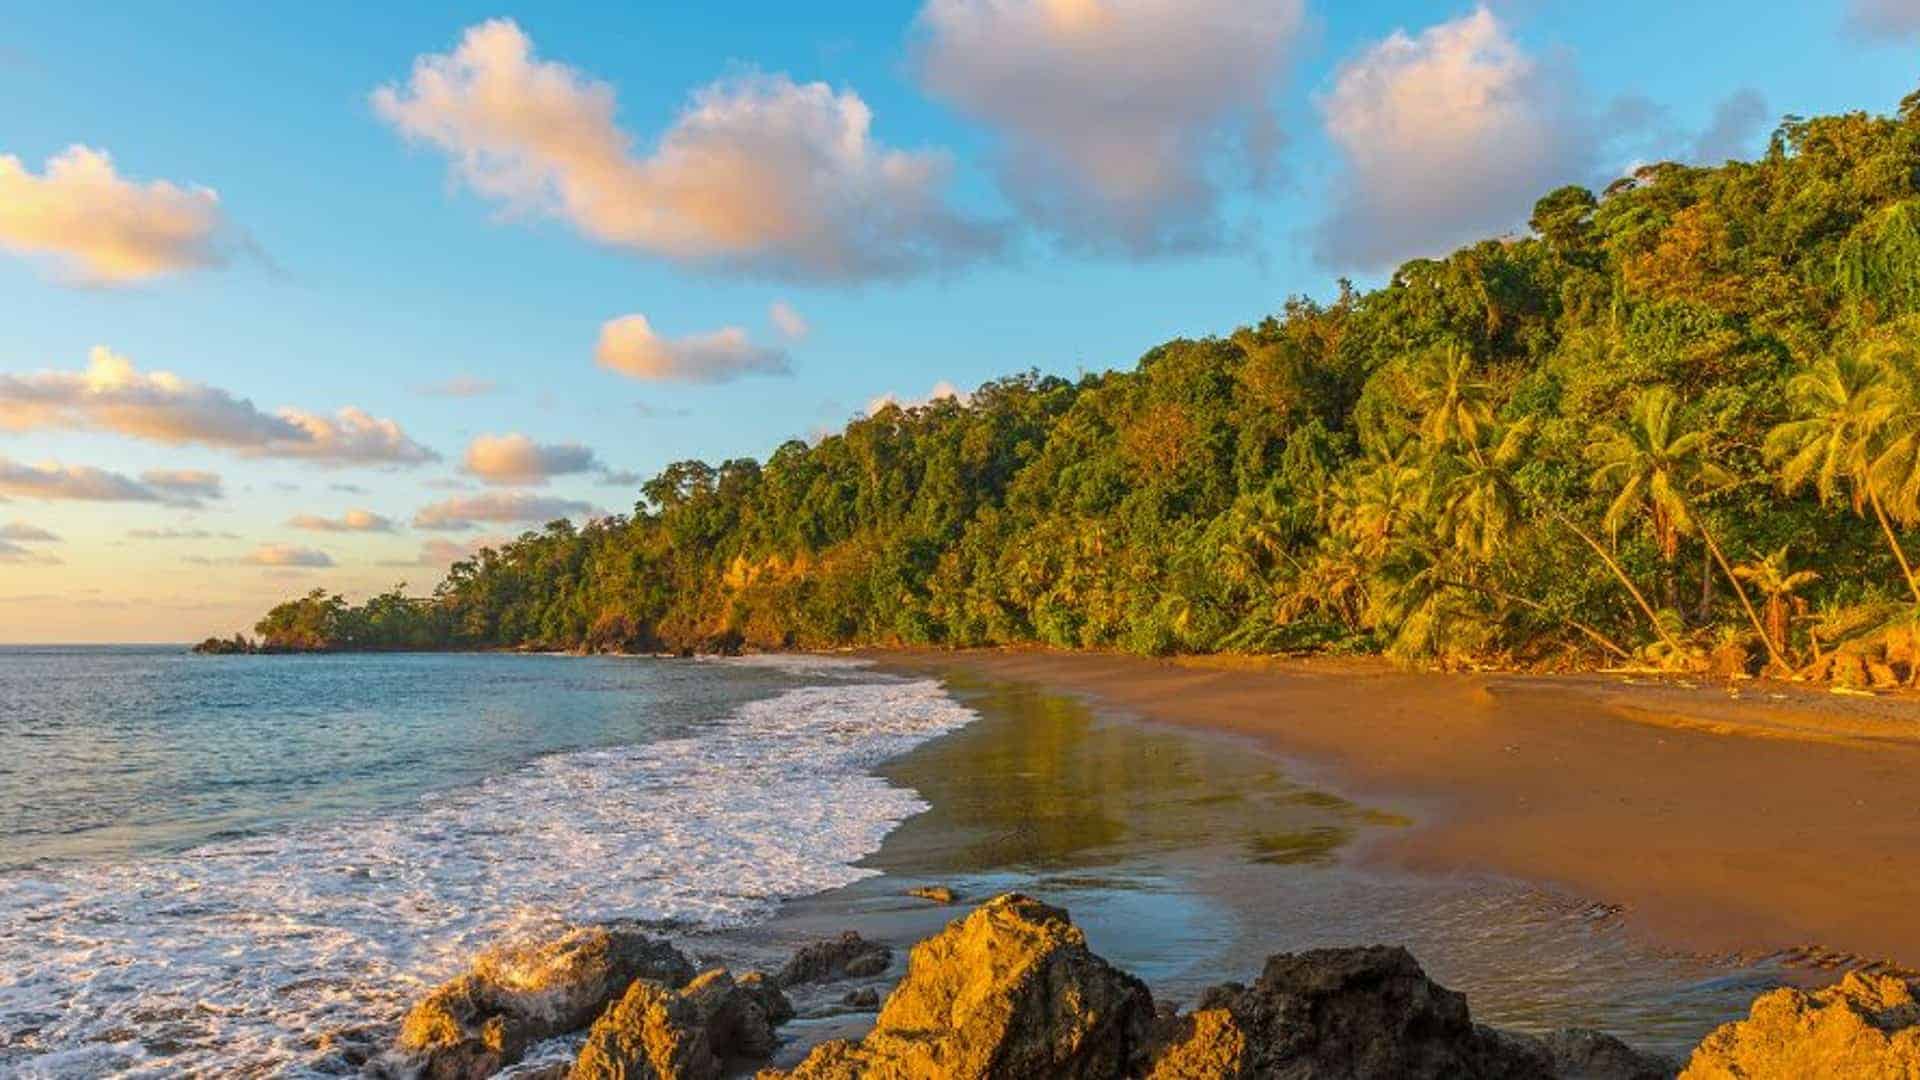 Sunset along the Pacific Coast of Costa Rica in the Osa Peninsula inside the Corcovado National Park with a view over the tropical rainforest.